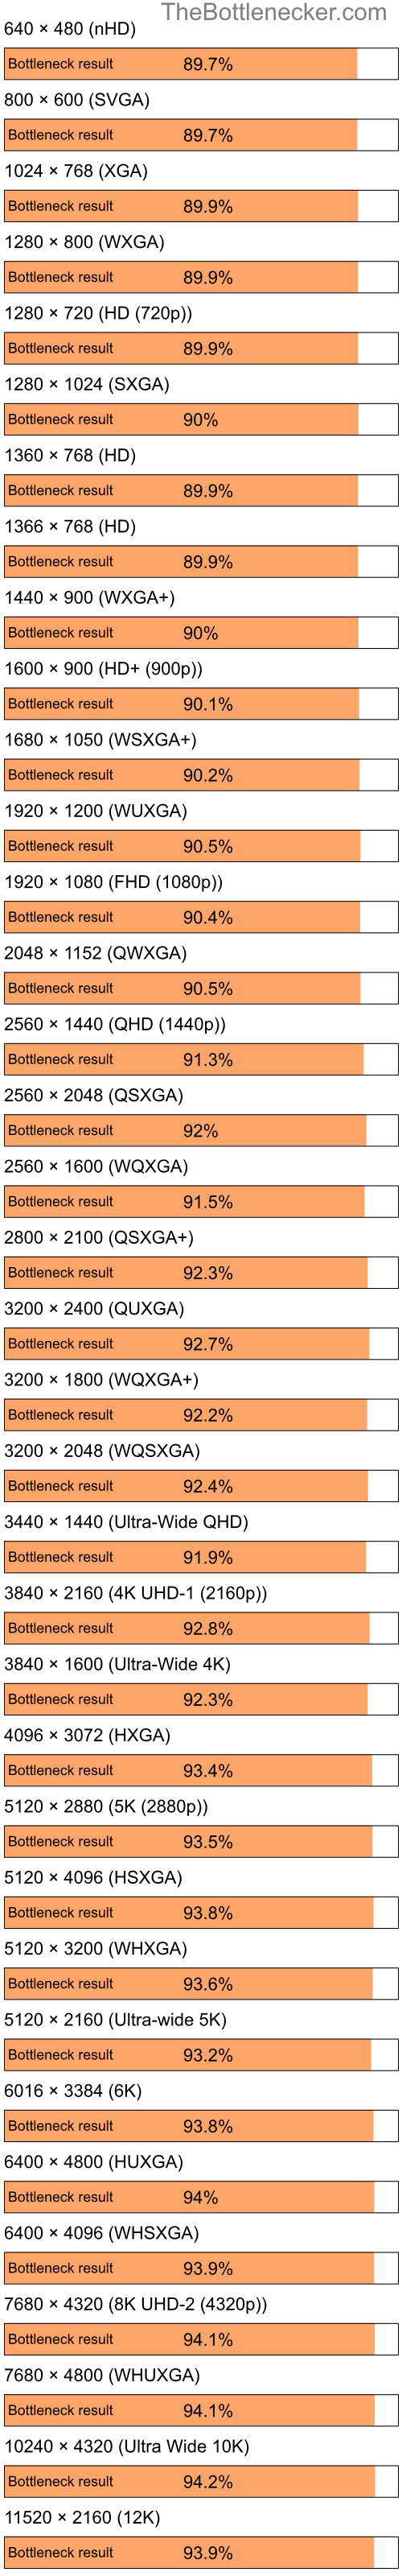 Bottleneck results by resolution for Intel Celeron M 410 and NVIDIA GeForce FX Go 5200 in Graphic Card Intense Tasks